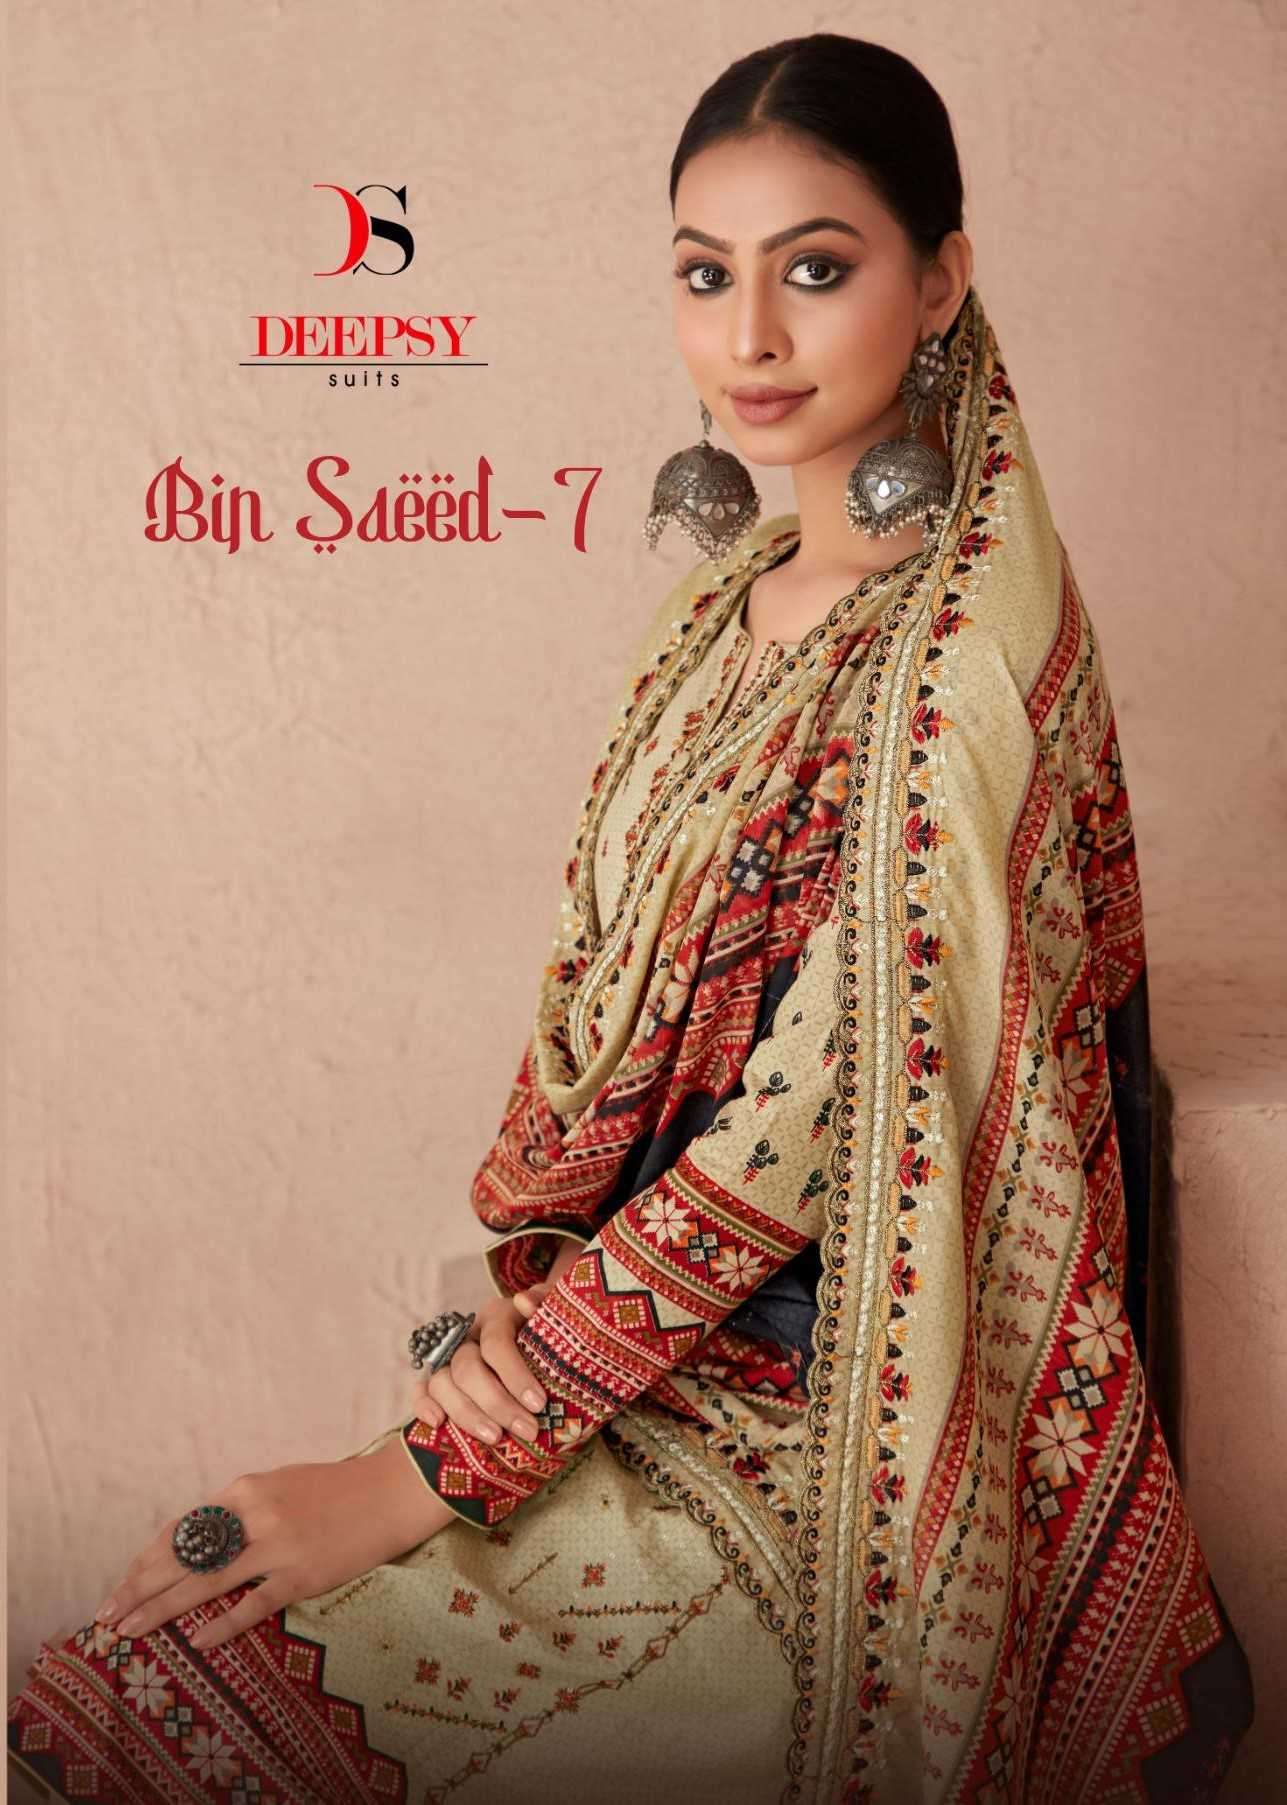 deepsy suits bin saeed vol 7 series 29001-29006 pure cotton suit 